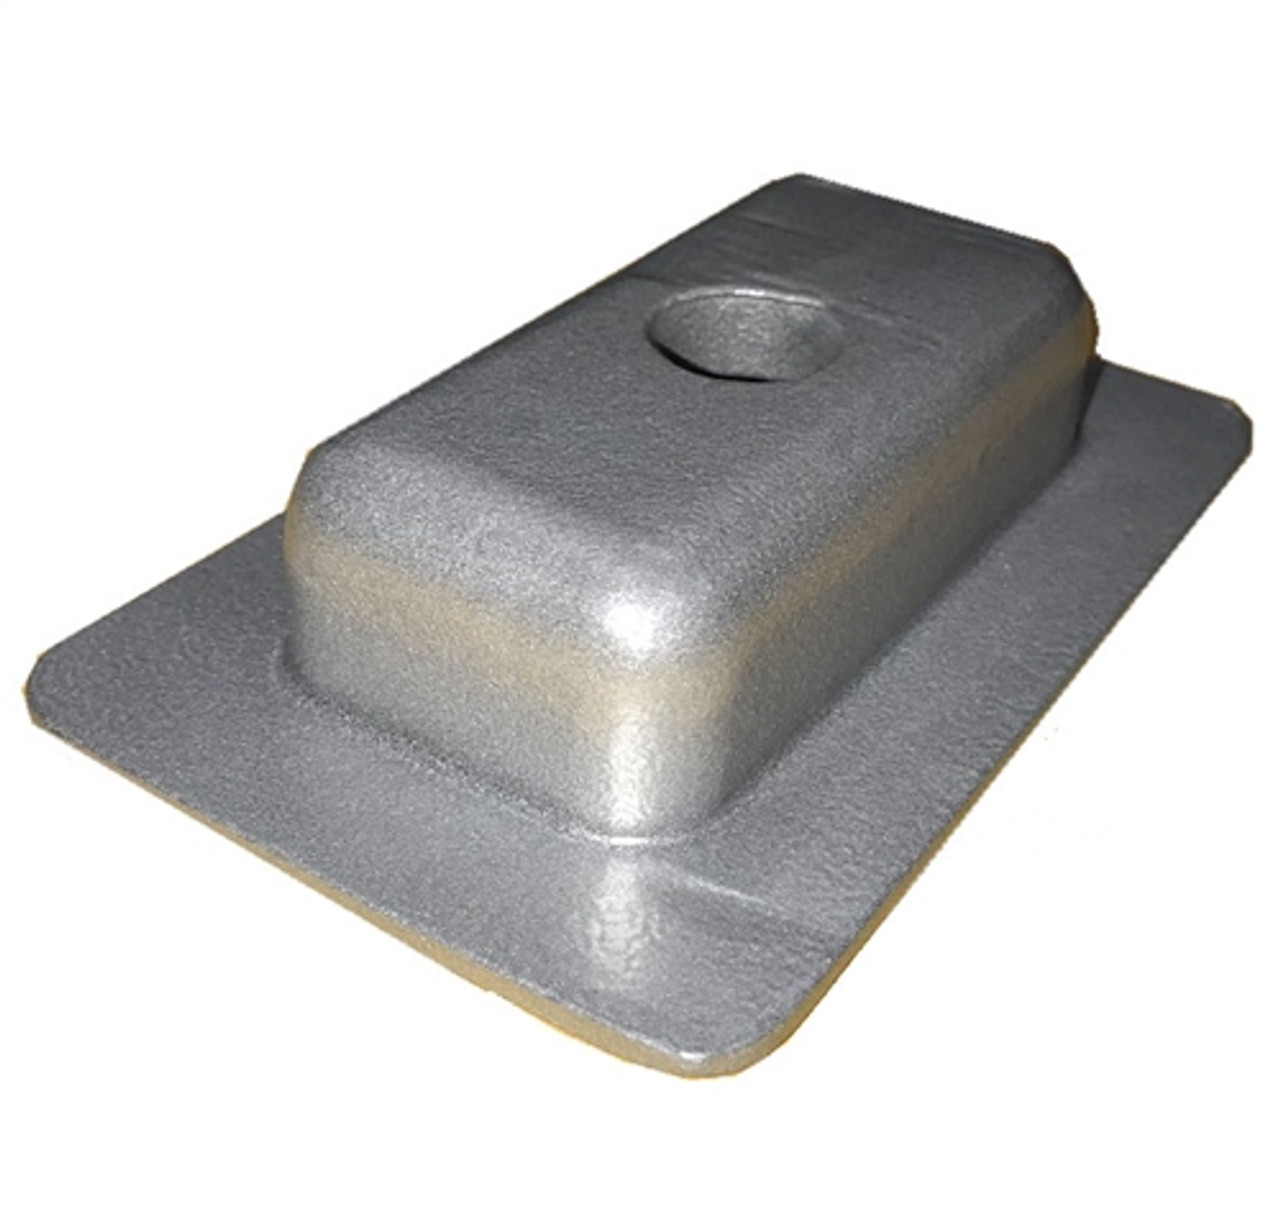 Chief Style Fastener Plate - Anchoring